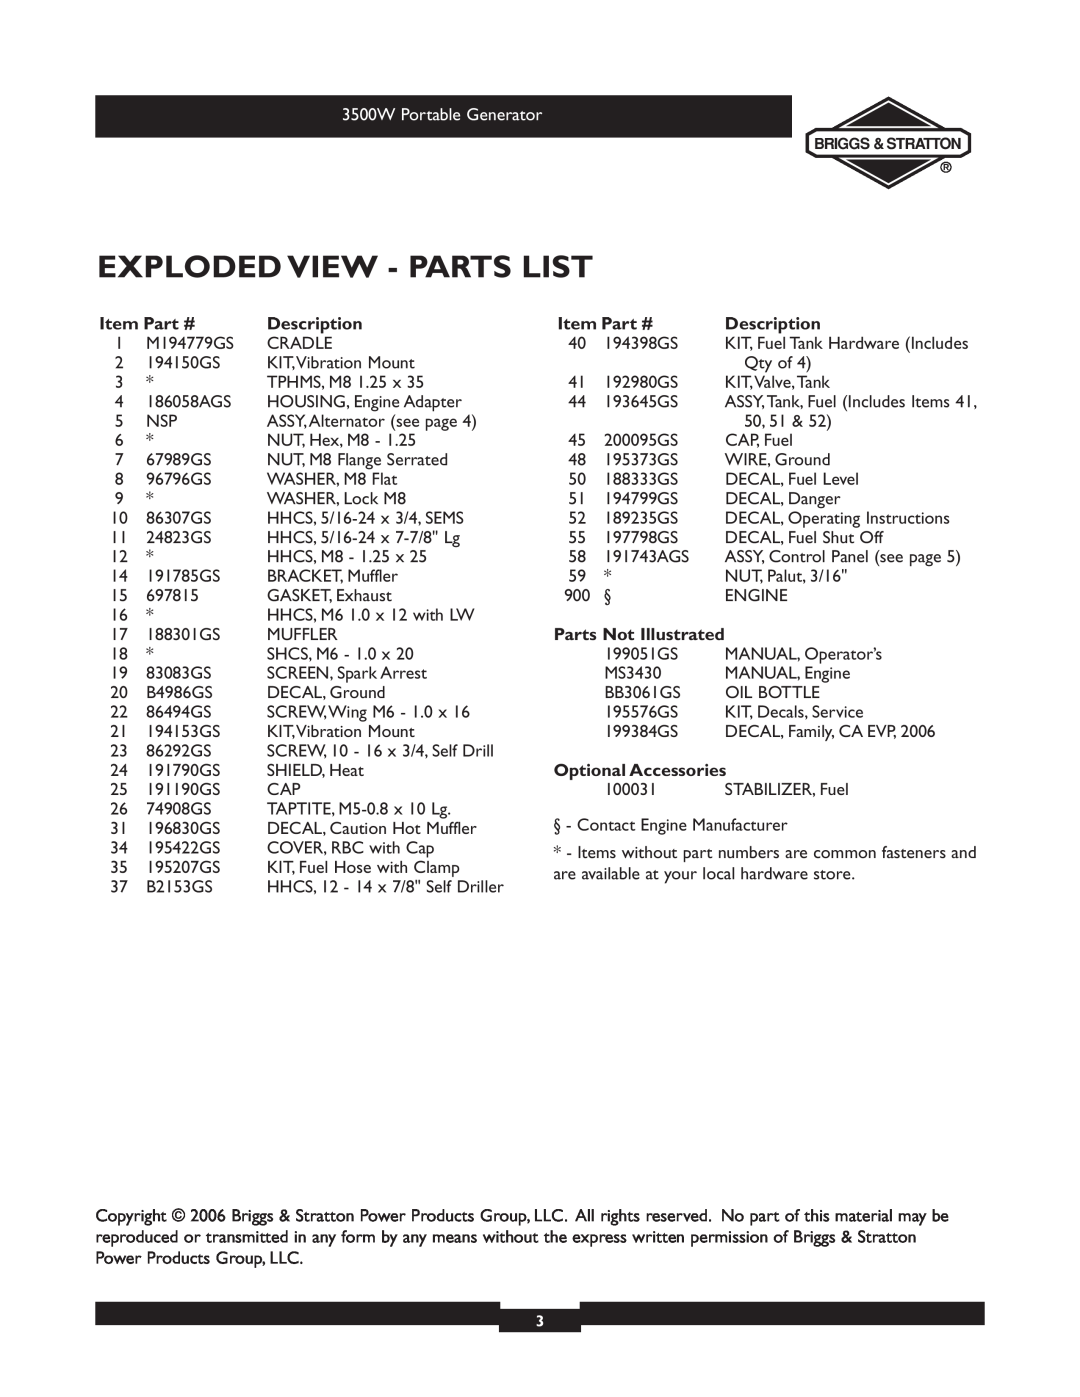 Briggs & Stratton 030208-1 manual Exploded View - Parts List, Item Part #, Description, Parts Not Illustrated 